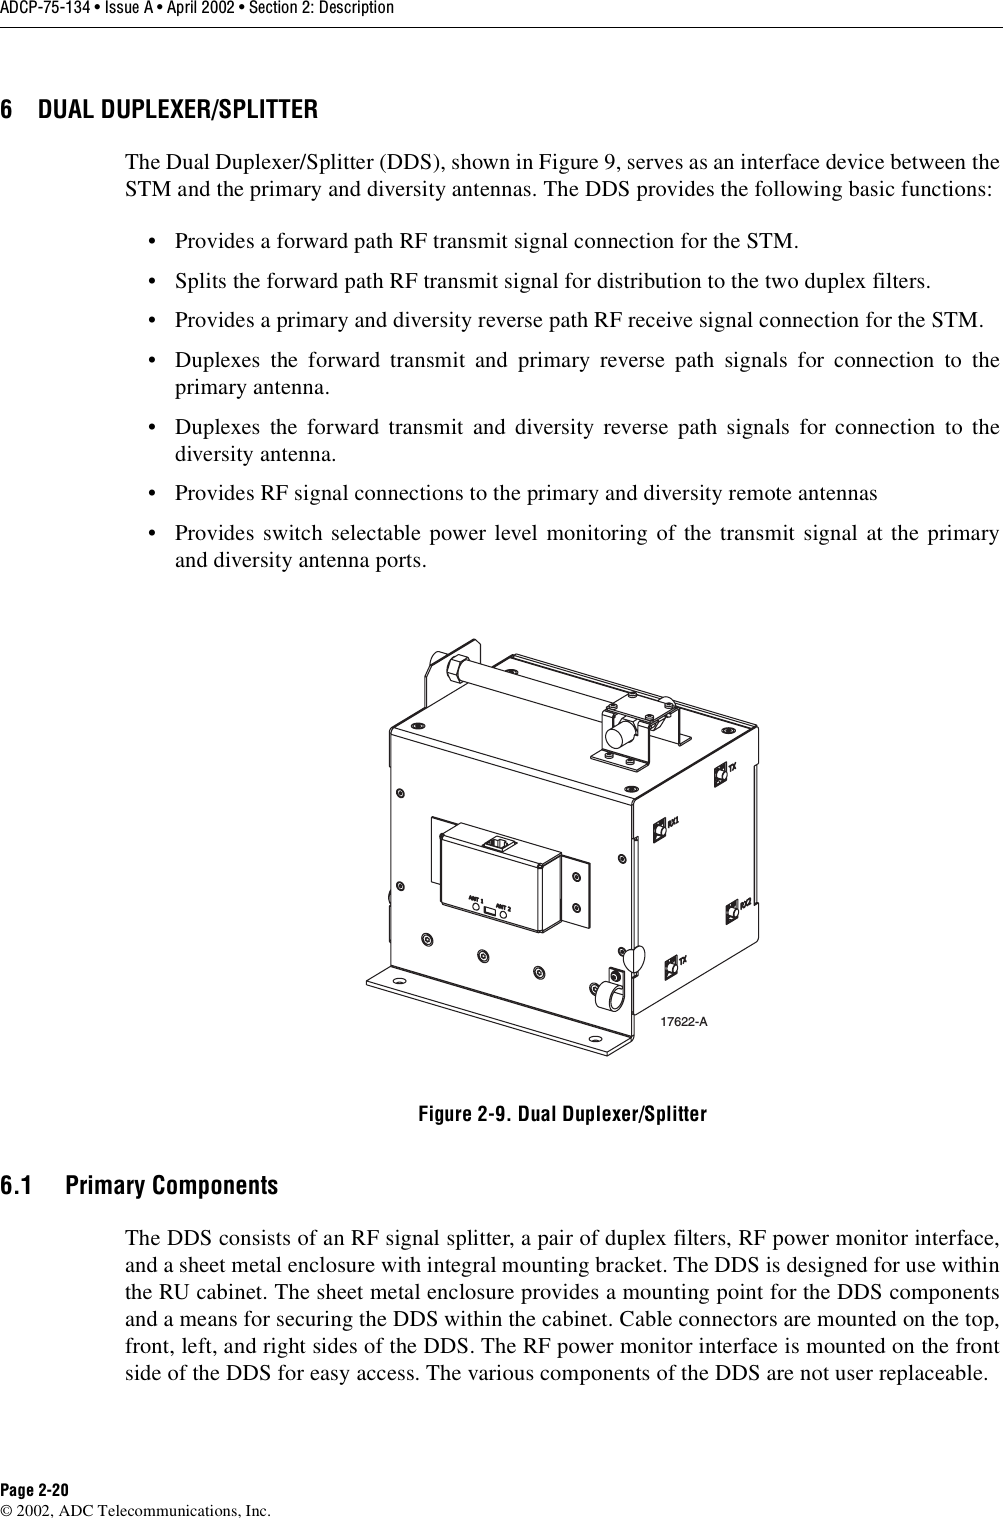 ADCP-75-134 • Issue A • April 2002 • Section 2: DescriptionPage 2-20©2002, ADC Telecommunications, Inc.6 DUAL DUPLEXER/SPLITTERThe Dual Duplexer/Splitter (DDS), shown in Figure 9, serves as an interface device between theSTM and the primary and diversity antennas. The DDS provides the following basic functions:• Provides aforward path RF transmit signal connection for the STM.• Splits the forward path RF transmit signal for distribution to the two duplex filters.• Provides aprimary and diversity reverse path RF receive signal connection for the STM.• Duplexes the forward transmit and primary reverse path signals for connection to theprimary antenna.• Duplexes the forward transmit and diversity reverse path signals for connection to thediversity antenna.• Provides RF signal connections to the primary and diversity remote antennas• Provides switch selectable power level monitoring of the transmit signal at the primaryand diversity antenna ports.Figure 2-9. Dual Duplexer/Splitter6.1 Primary ComponentsThe DDS consists of an RF signal splitter, apair of duplex filters, RF power monitor interface,and asheet metal enclosure with integral mounting bracket. The DDS is designed for use withinthe RU cabinet. The sheet metal enclosure provides amounting point for the DDS componentsand ameans for securing the DDS within the cabinet. Cable connectors are mounted on the top,front, left, and right sides of the DDS. The RF power monitor interface is mounted on the frontside of the DDS for easy access. The various components of the DDS are not user replaceable.17622-A